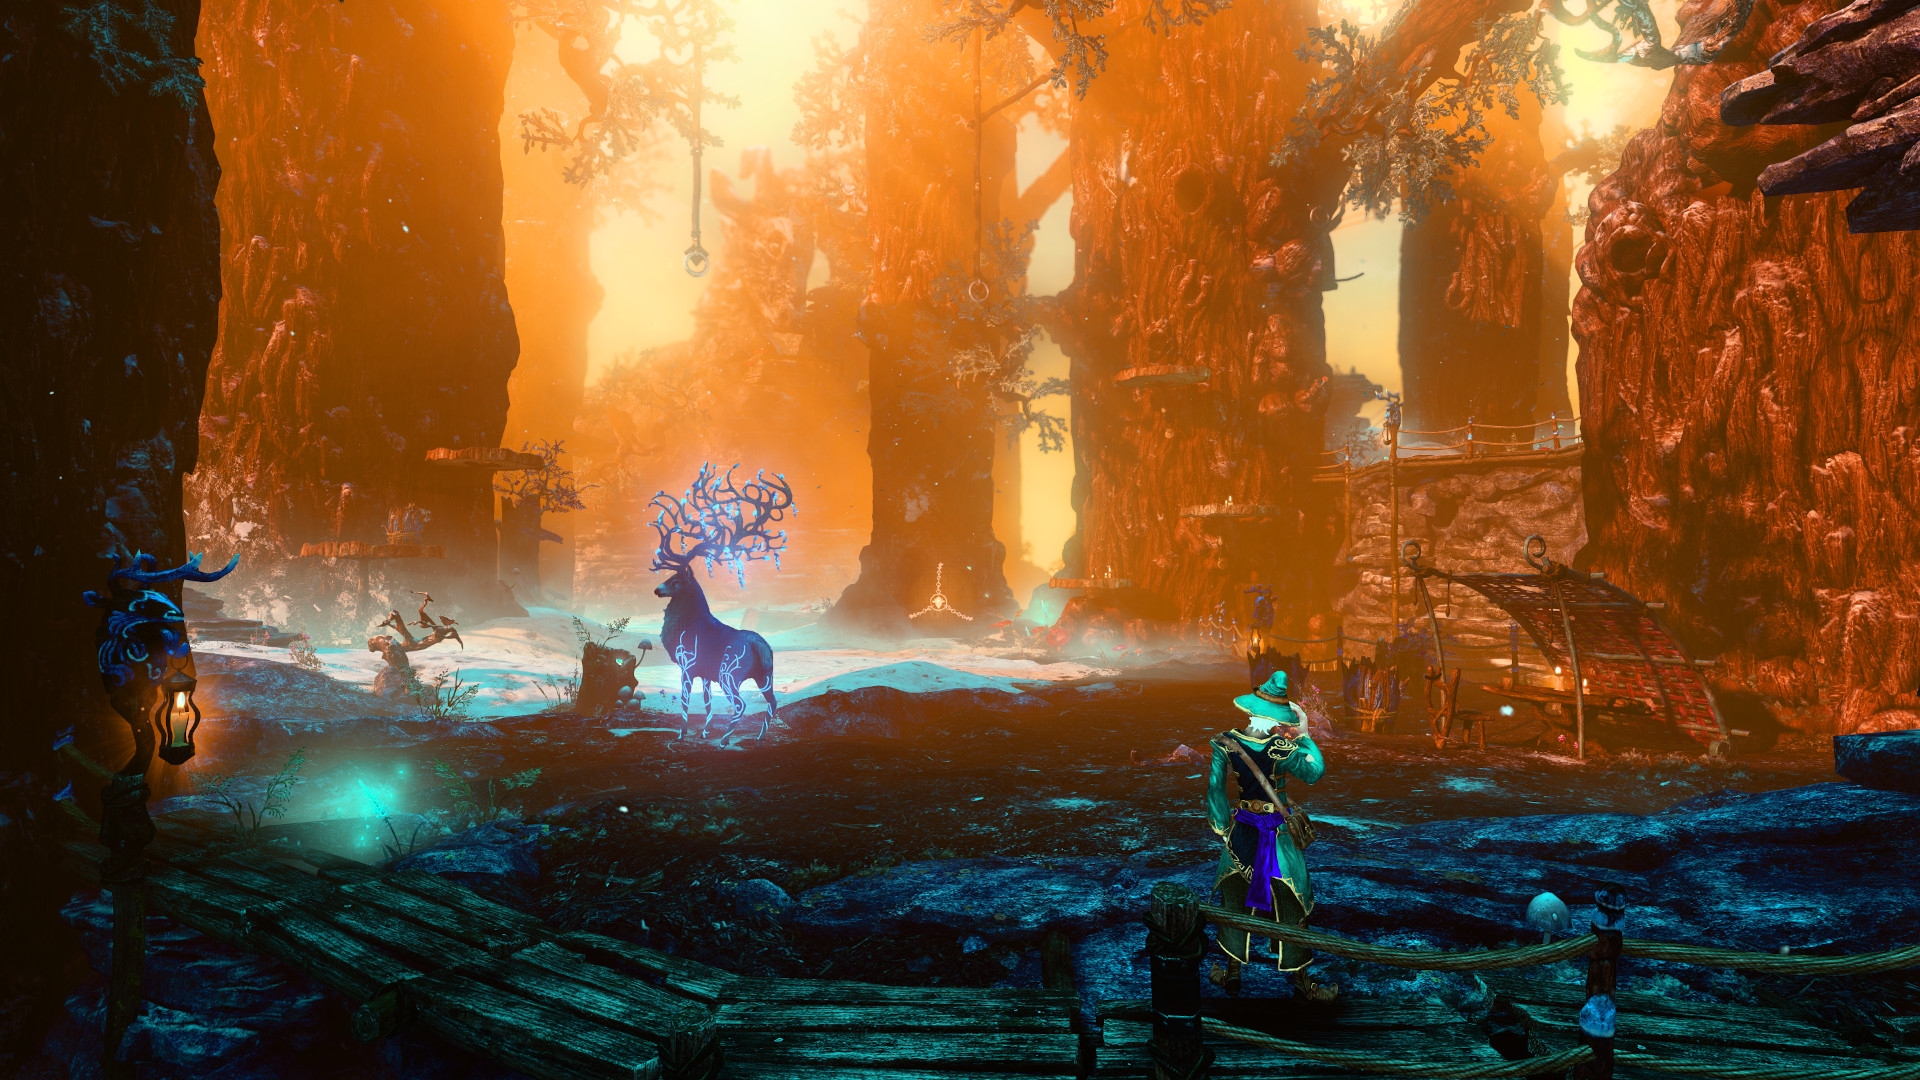 download free trine 3 the artifacts of power